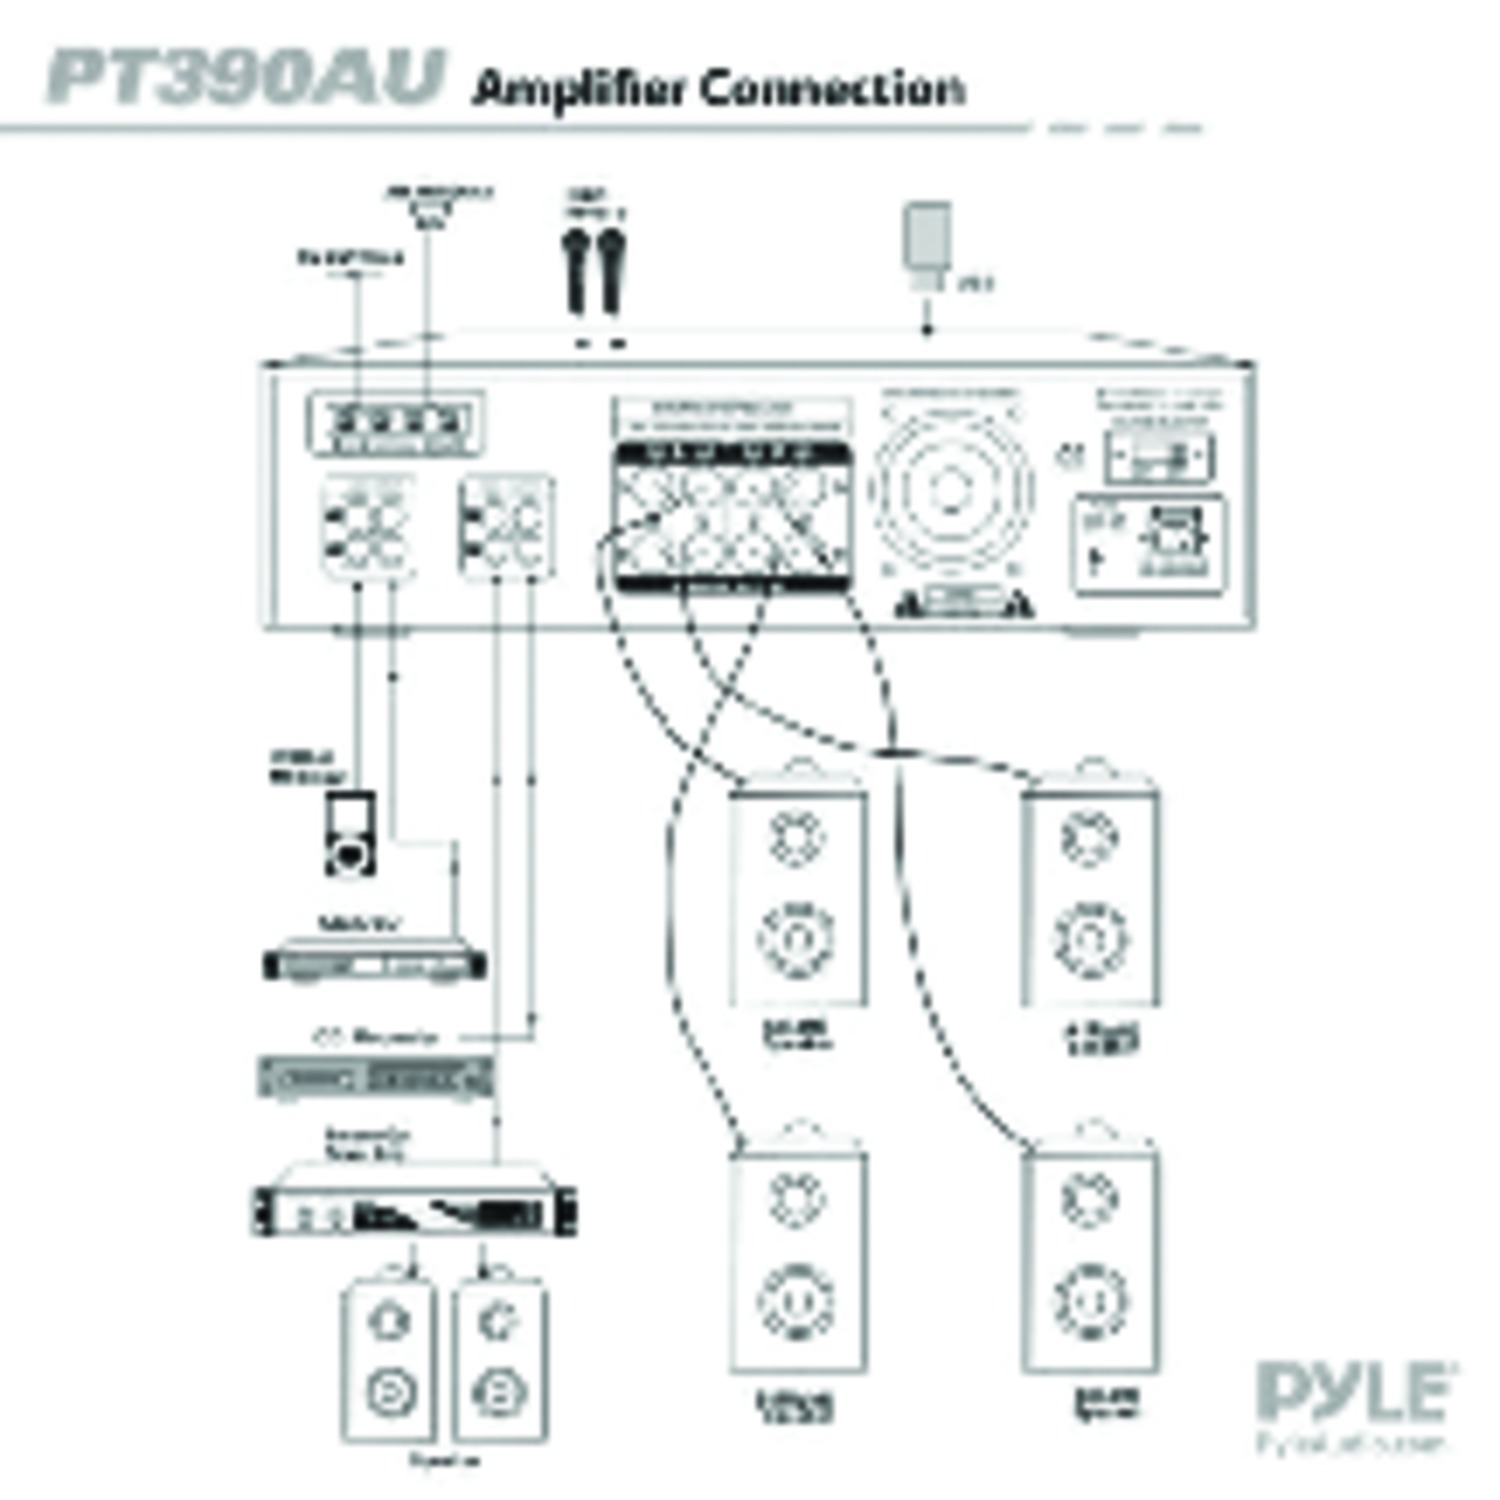 New Pyle PT390AU 300W 4 Channel Home Theater Amplifier Receiver Stereo USB/SD - image 5 of 6